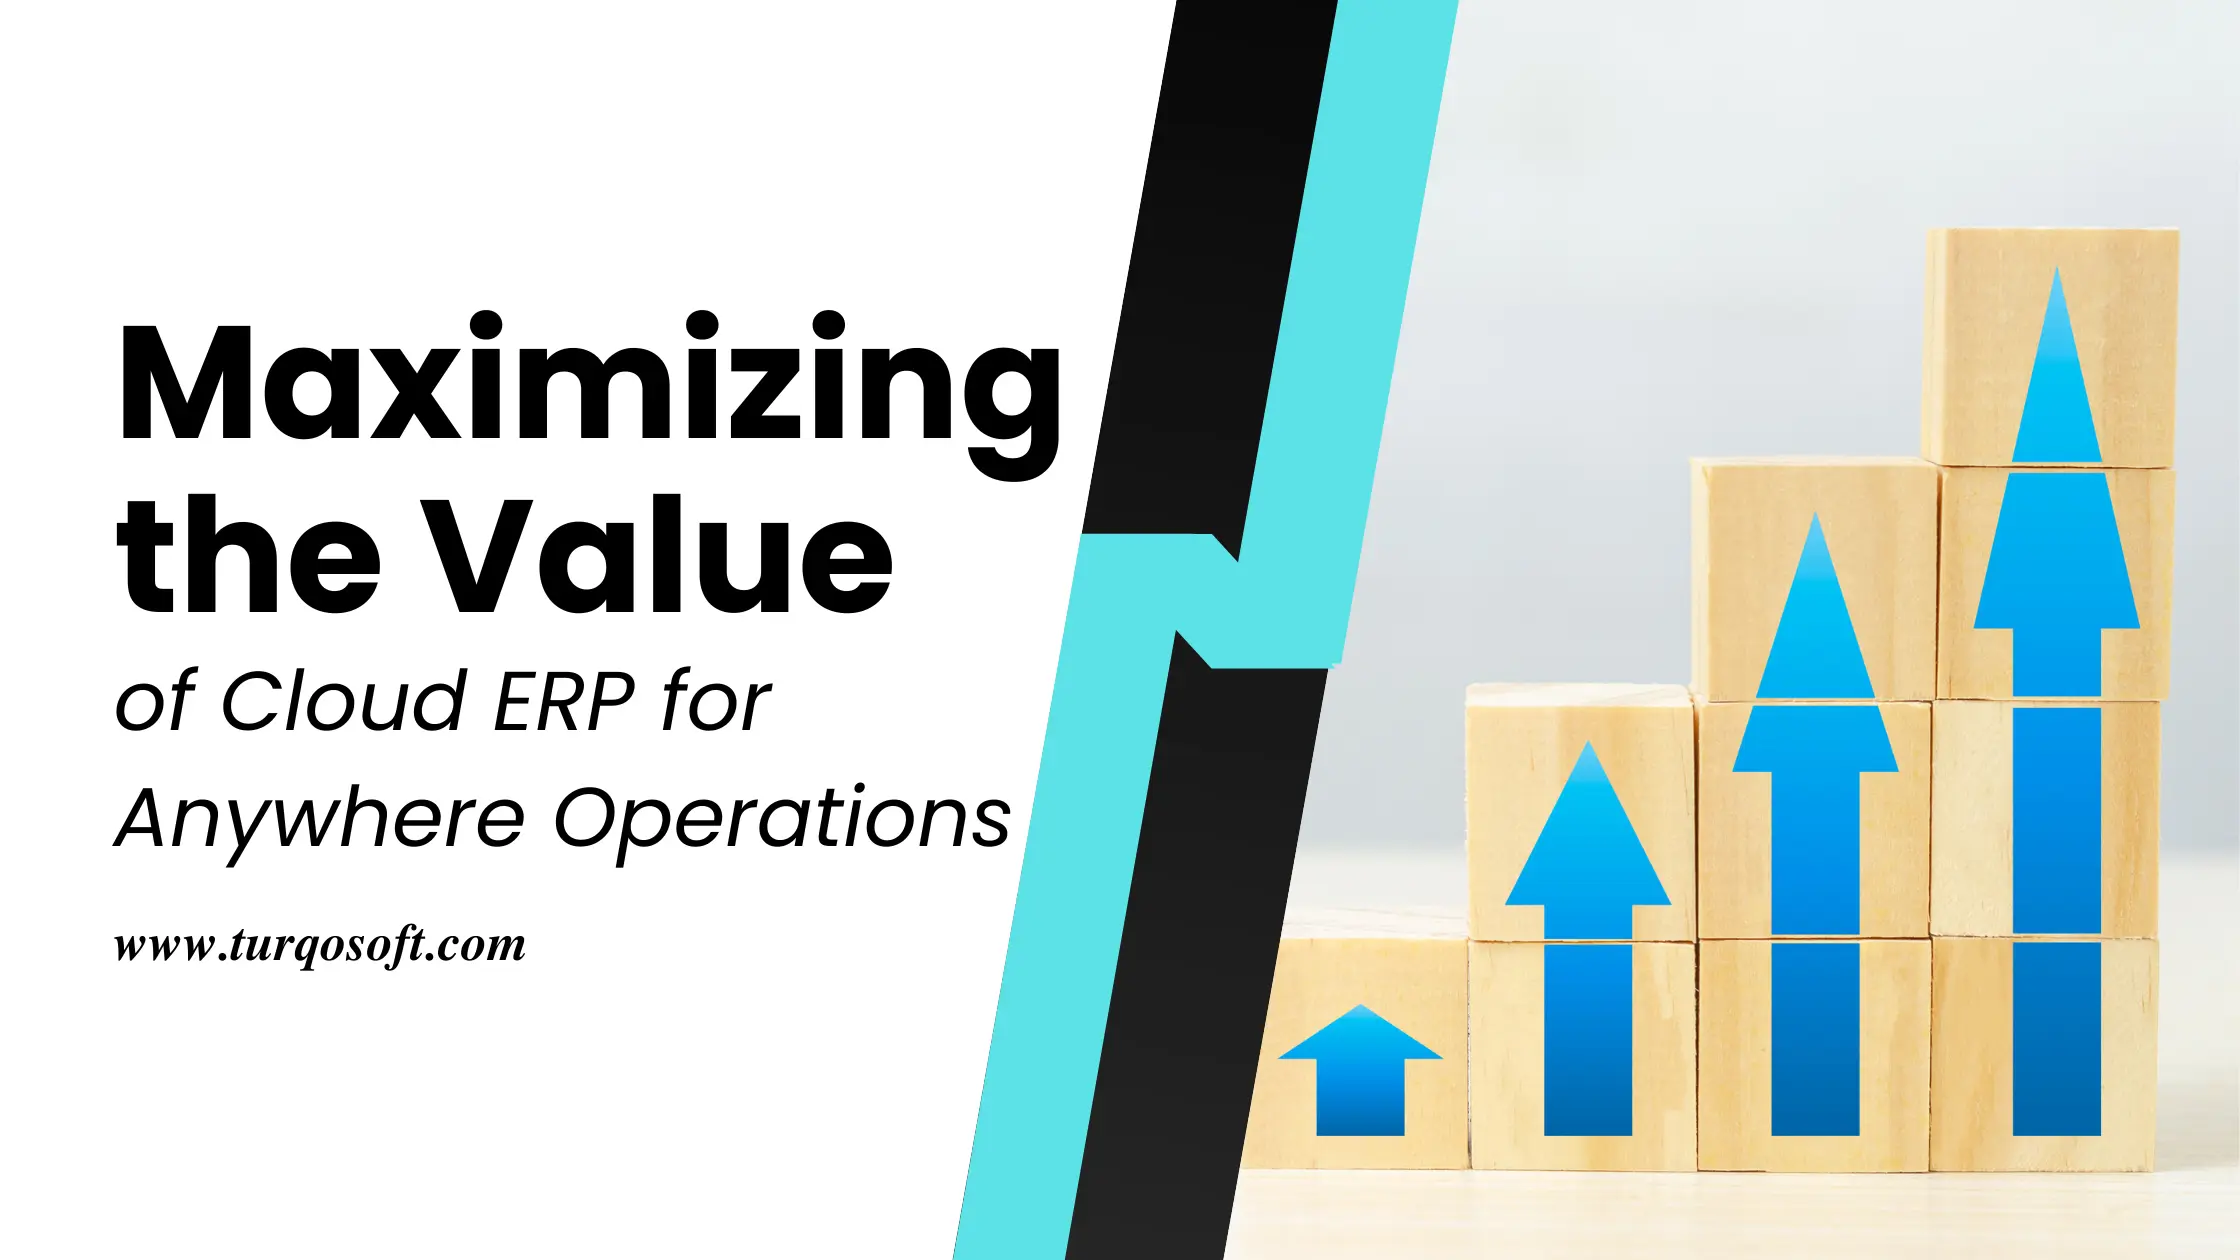 Maximizing the Value of Cloud ERP for Anywhere Operations